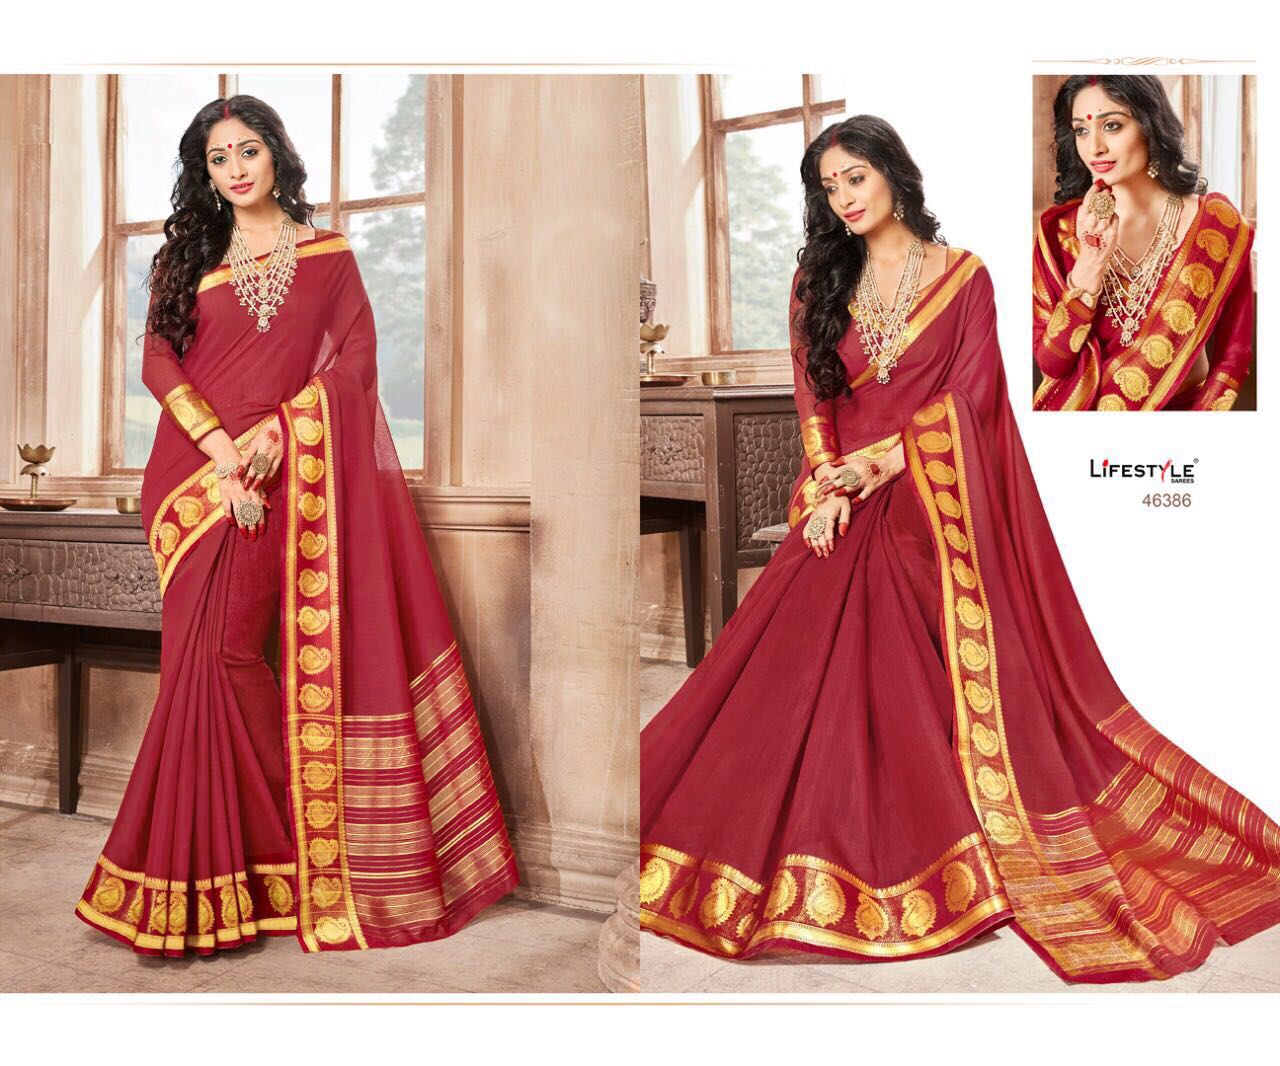 Saree in Red and Gold - Indian Clothing in Denver, CO, Aurora, CO, Boulder, CO, Fort Collins, CO, Colorado Springs, CO, Parker, CO, Highlands Ranch, CO, Cherry Creek, CO, Centennial, CO, and Longmont, CO. Nationwide shipping USA - India Fashion X